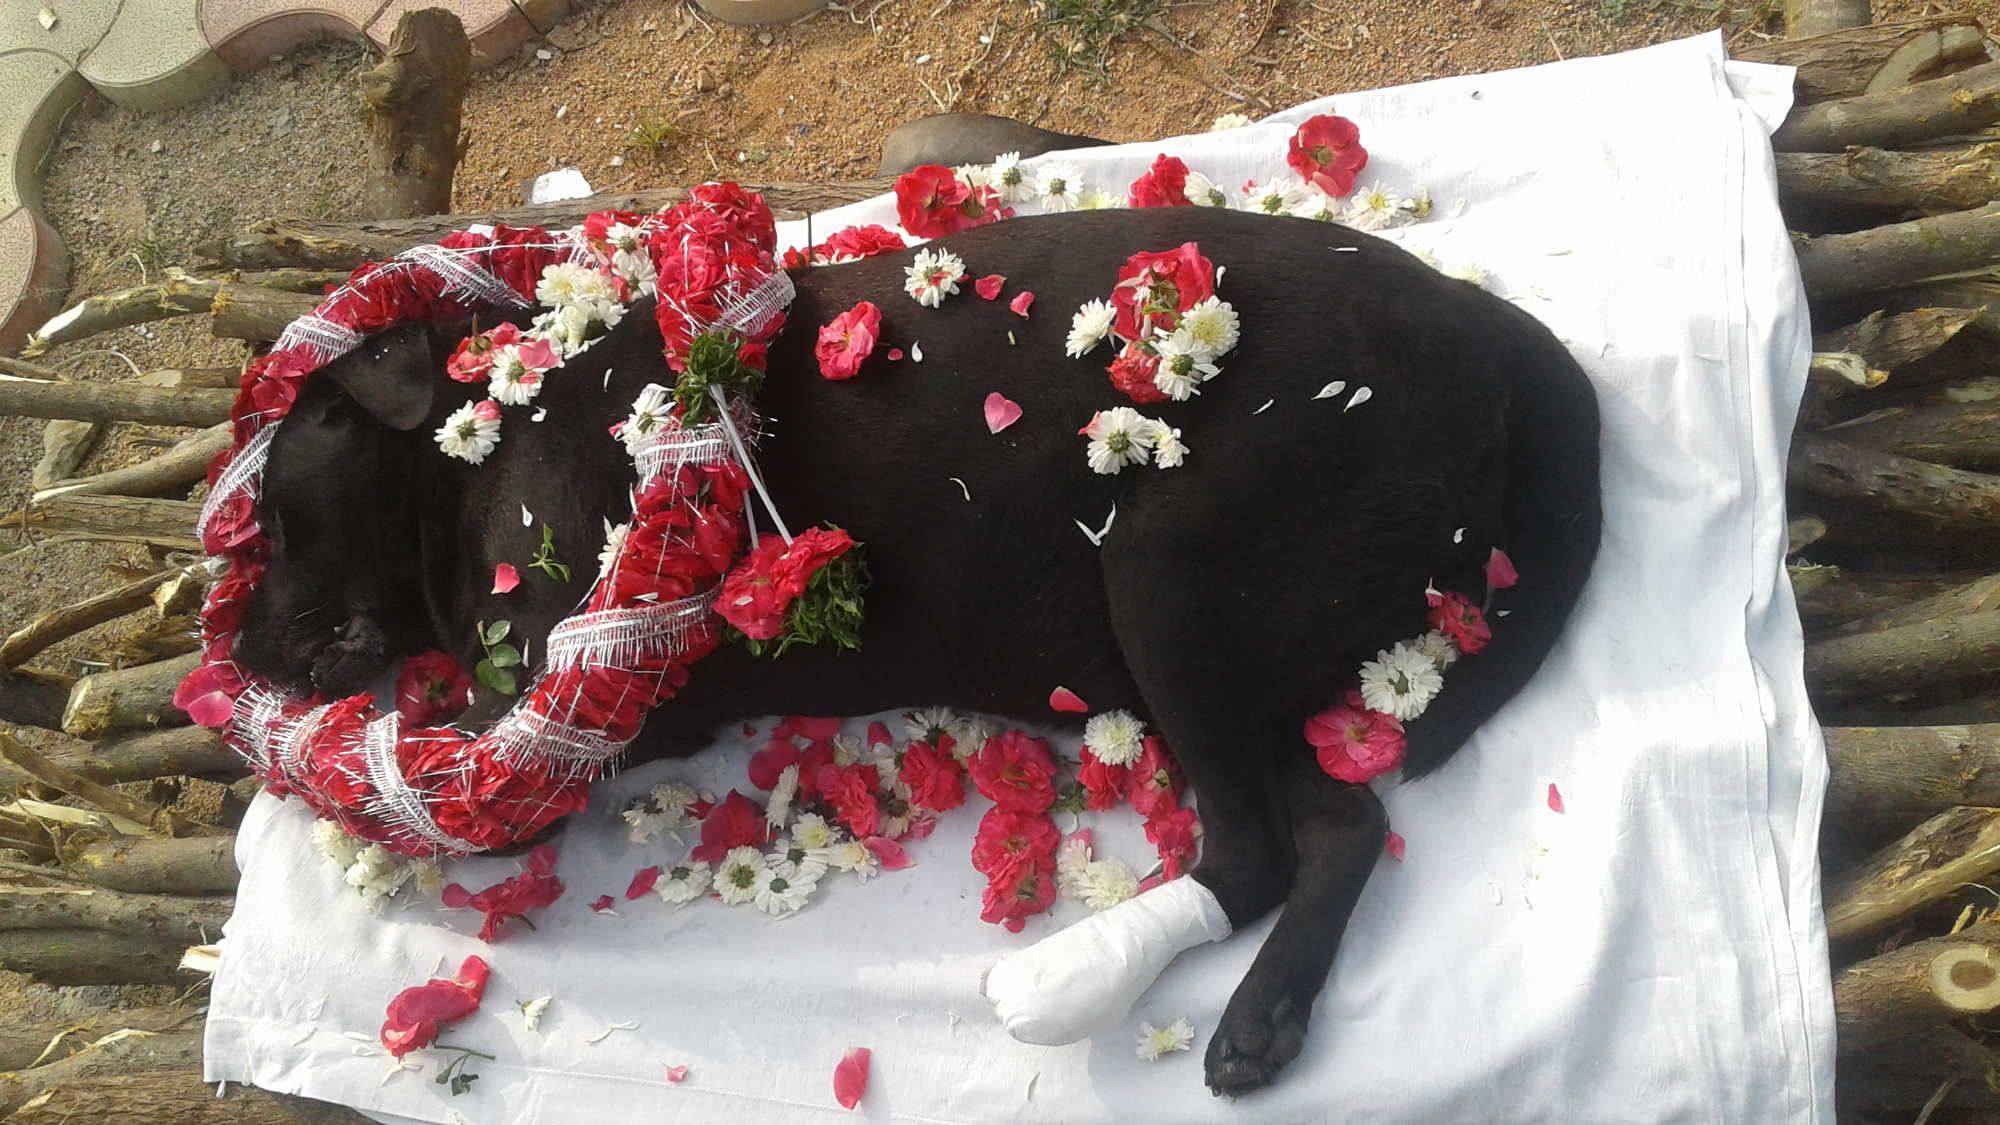 Pet Cremation in Hyderabad | Pet Funeral Services Call 9346122492